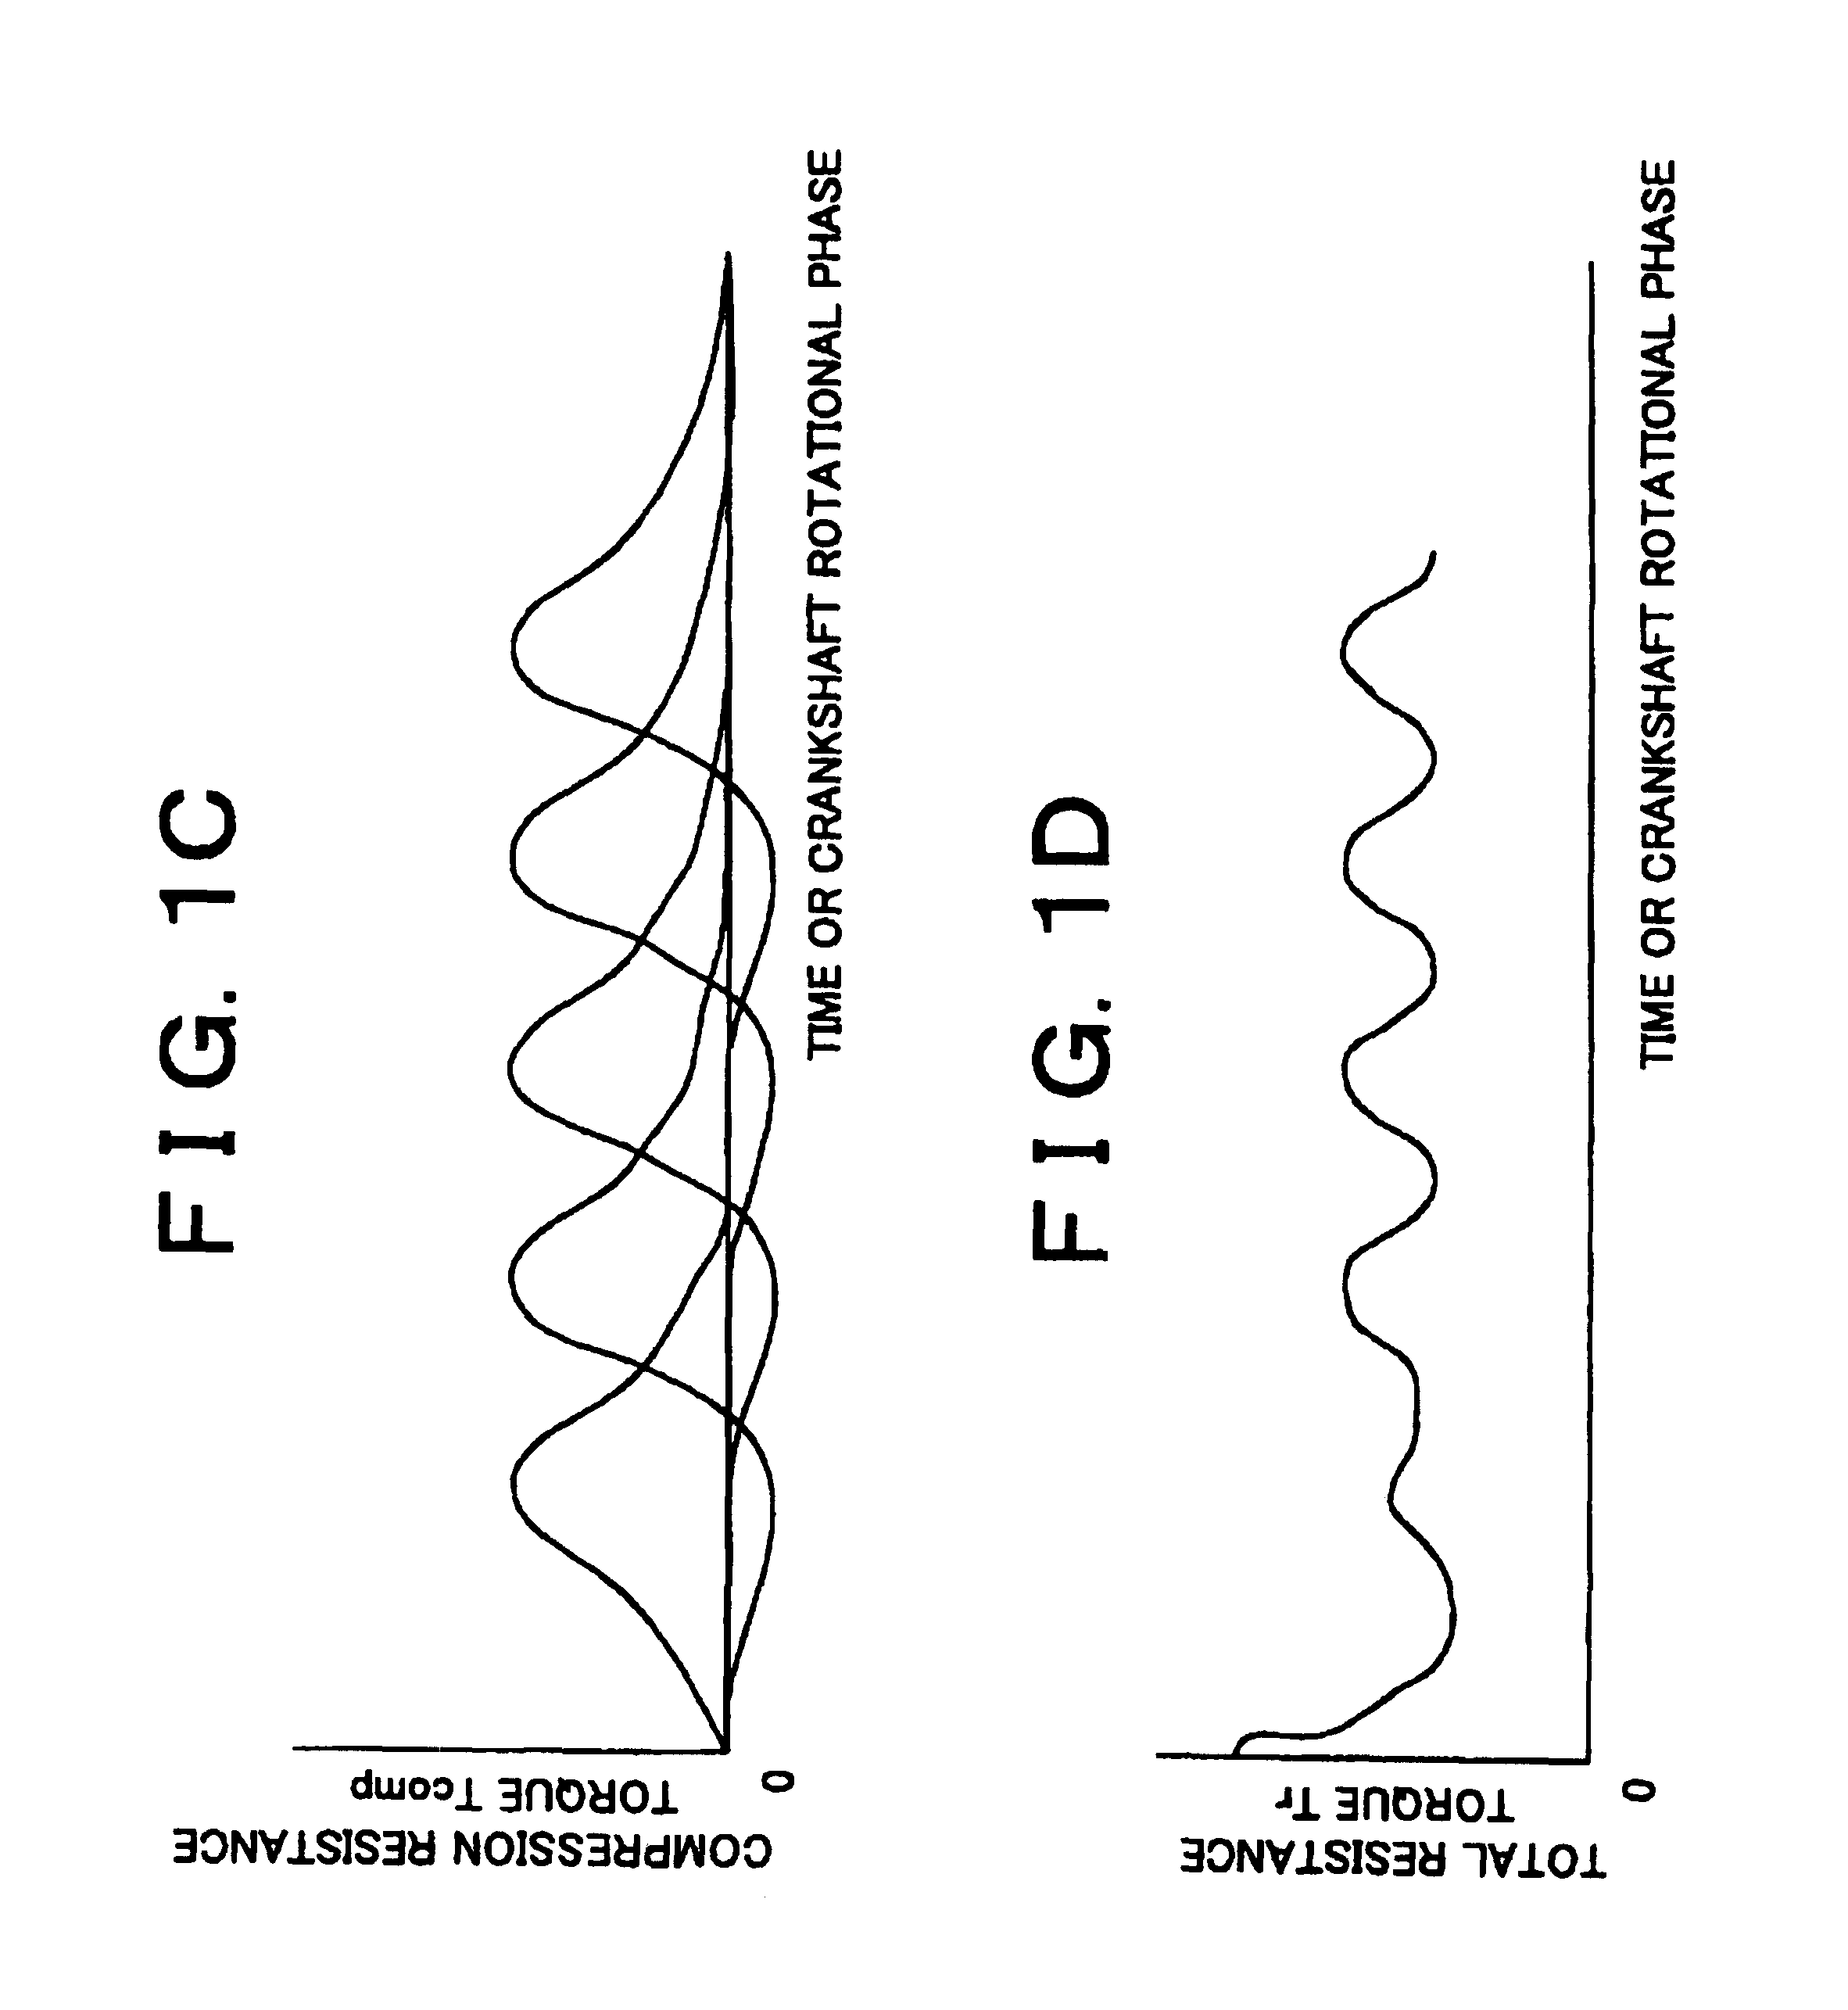 Cranking-caused vibration suppressing apparatus and method for internal combustion engine